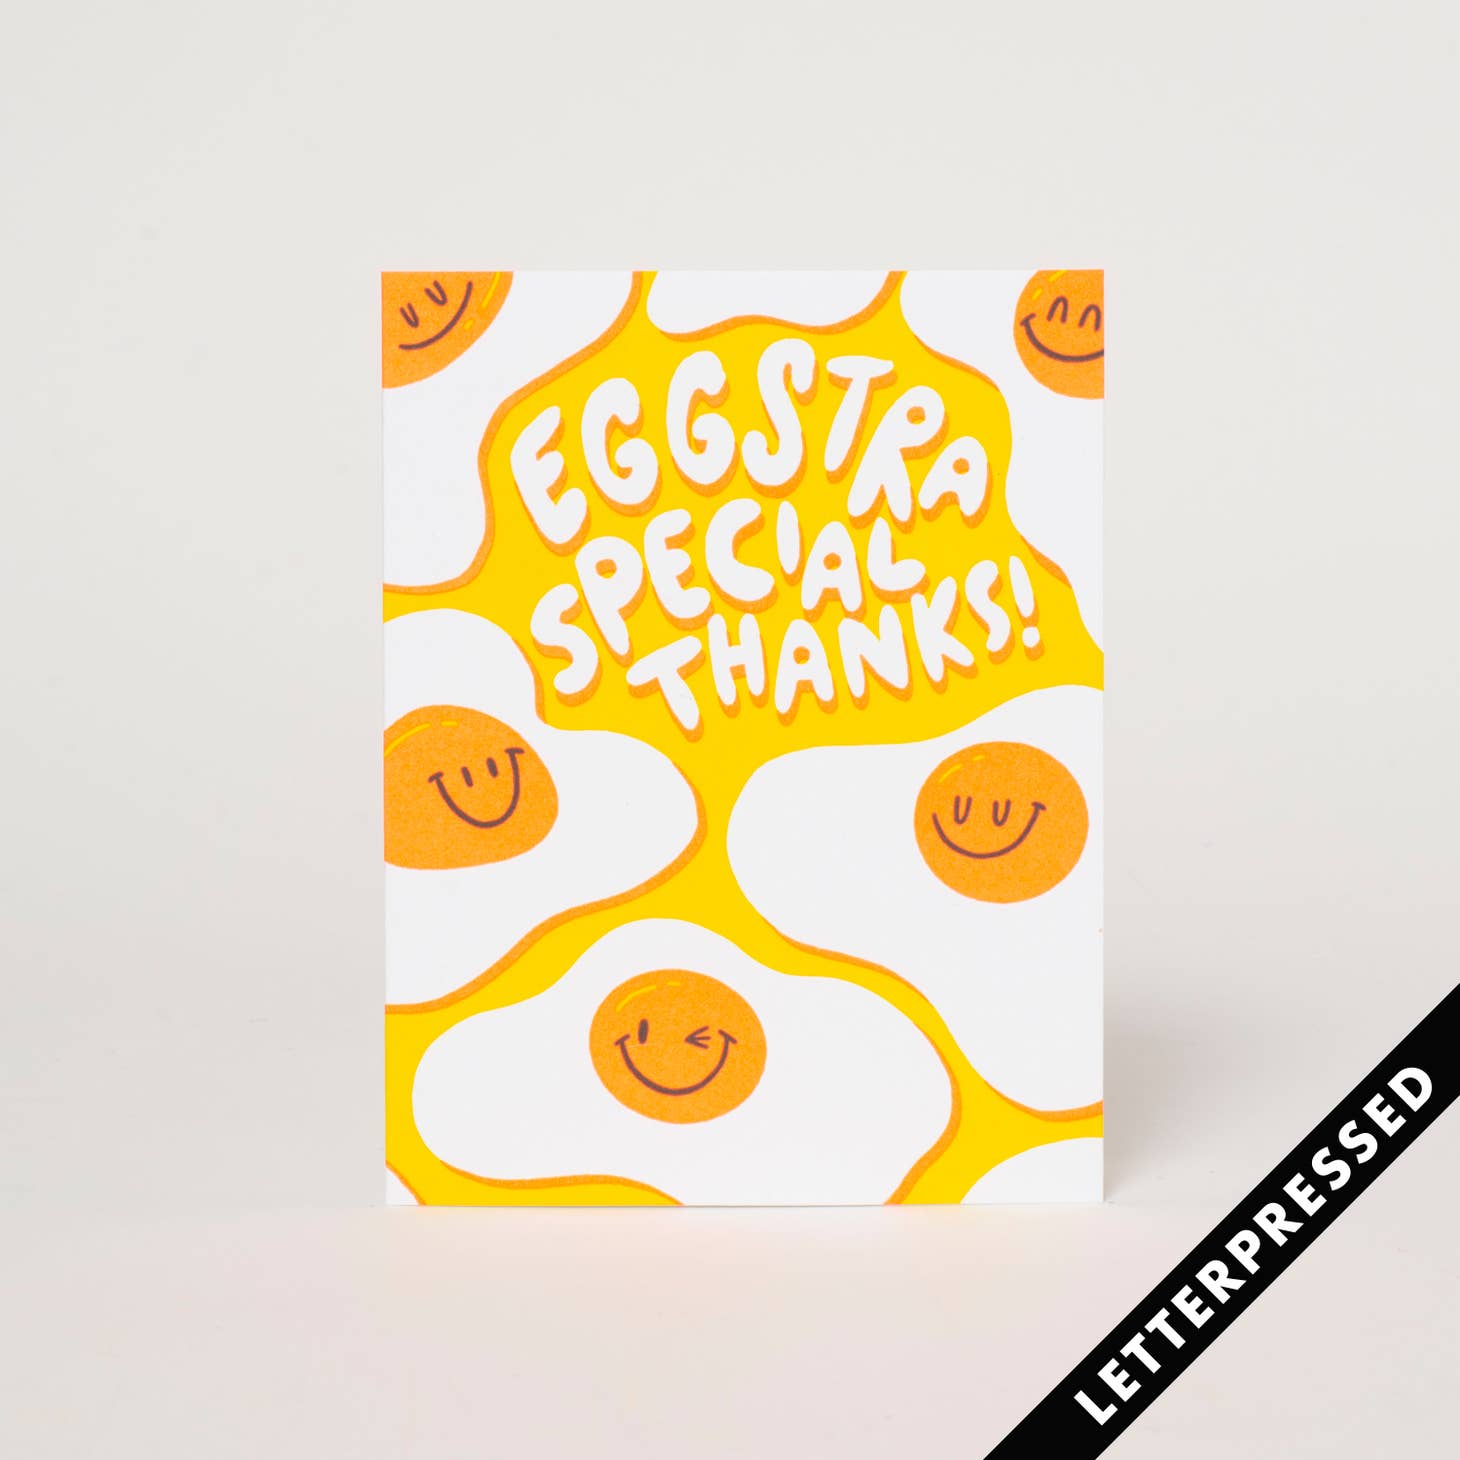 White background with images of fried eggs and white text says, "Eggstra special thanks!". Kraft envelope is included. 